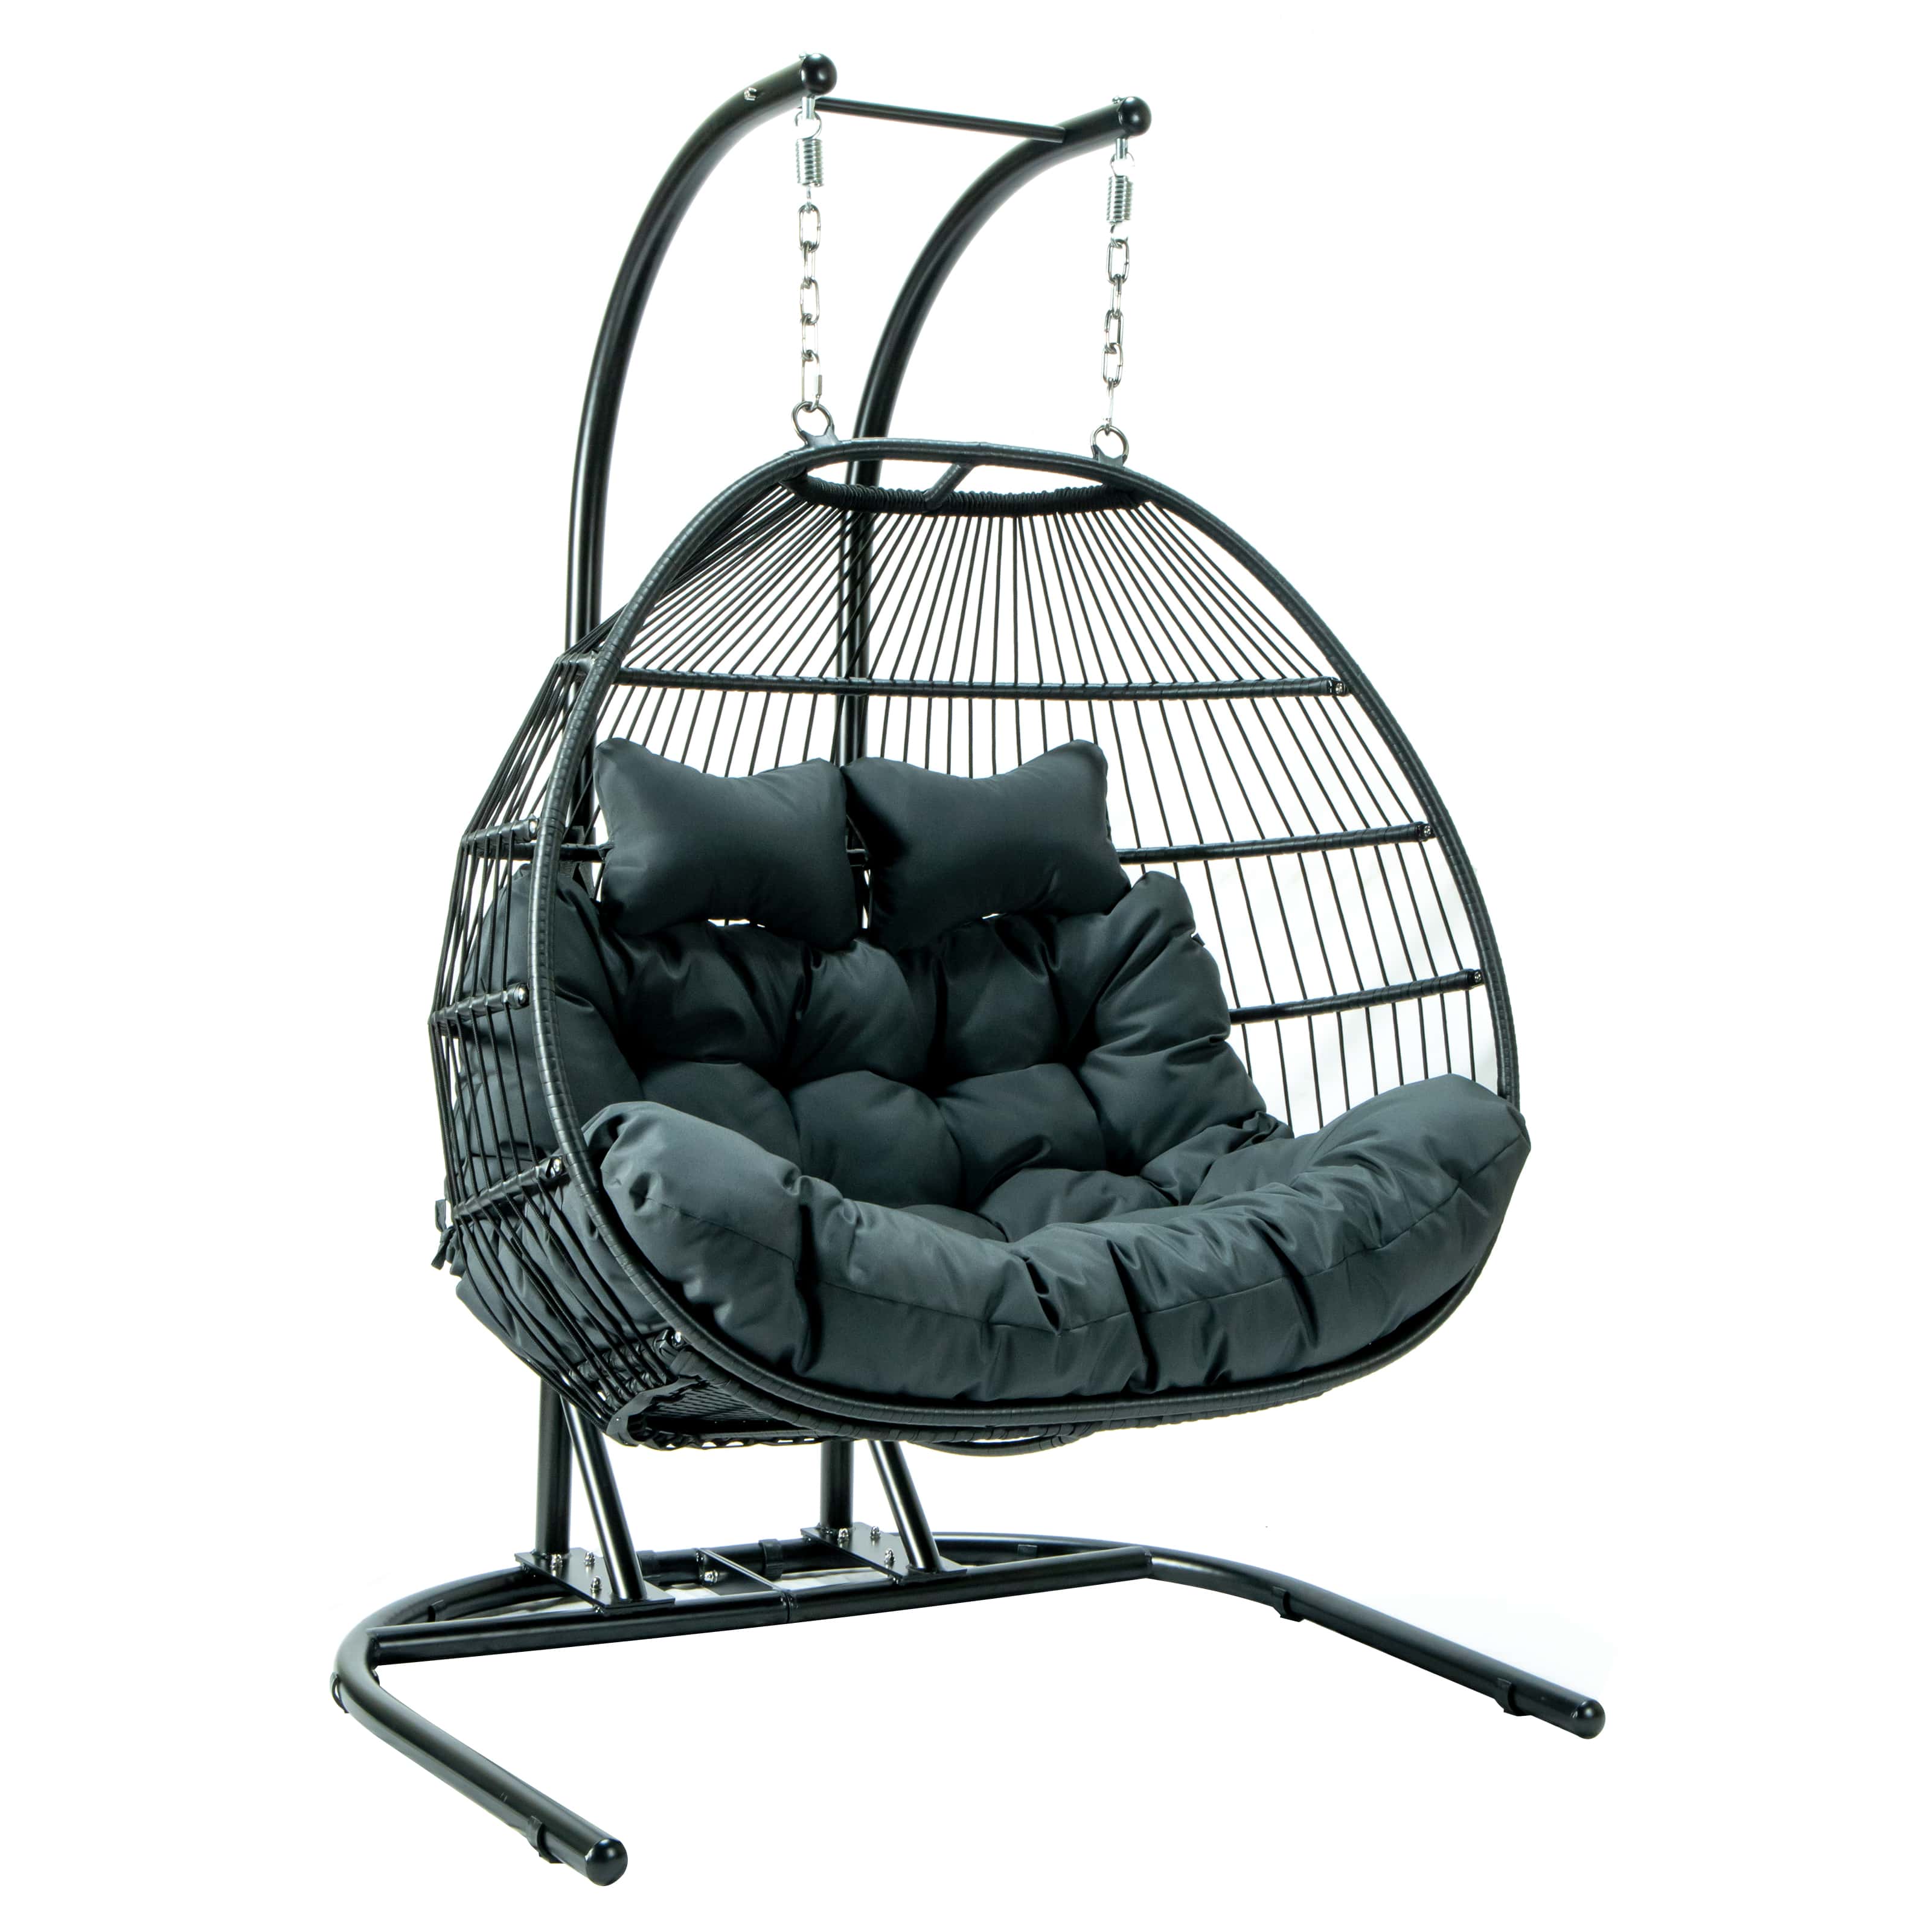 Wicker Hanging Egg Swing Chair - Folding Construction - Double Seater -  Black w/Charcoal Seat by LeisureMod